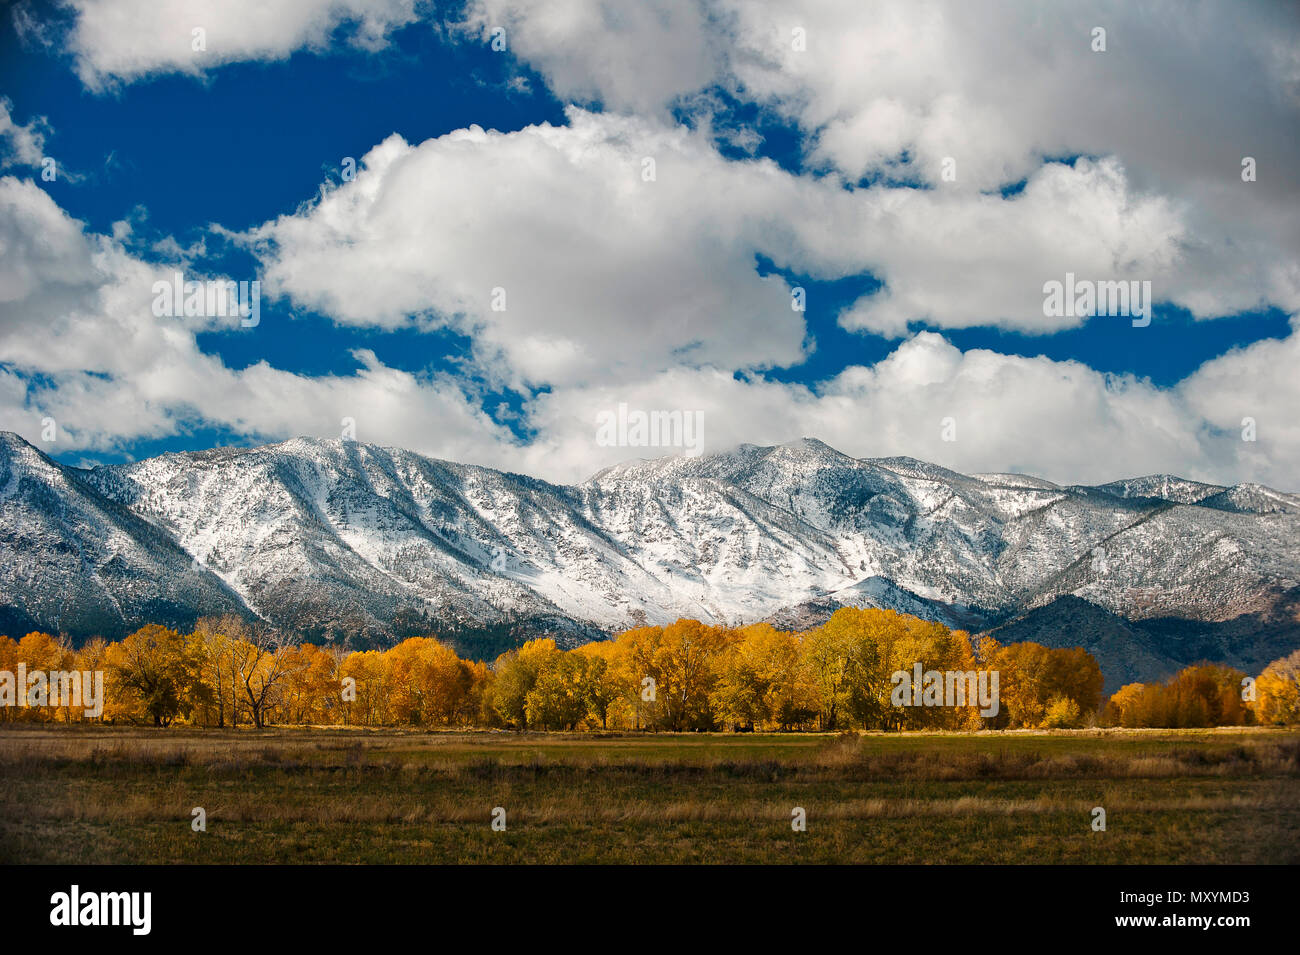 Fall colors in Gardnerville, Nevada with snow covered sierrra mountains in the background Stock Photo